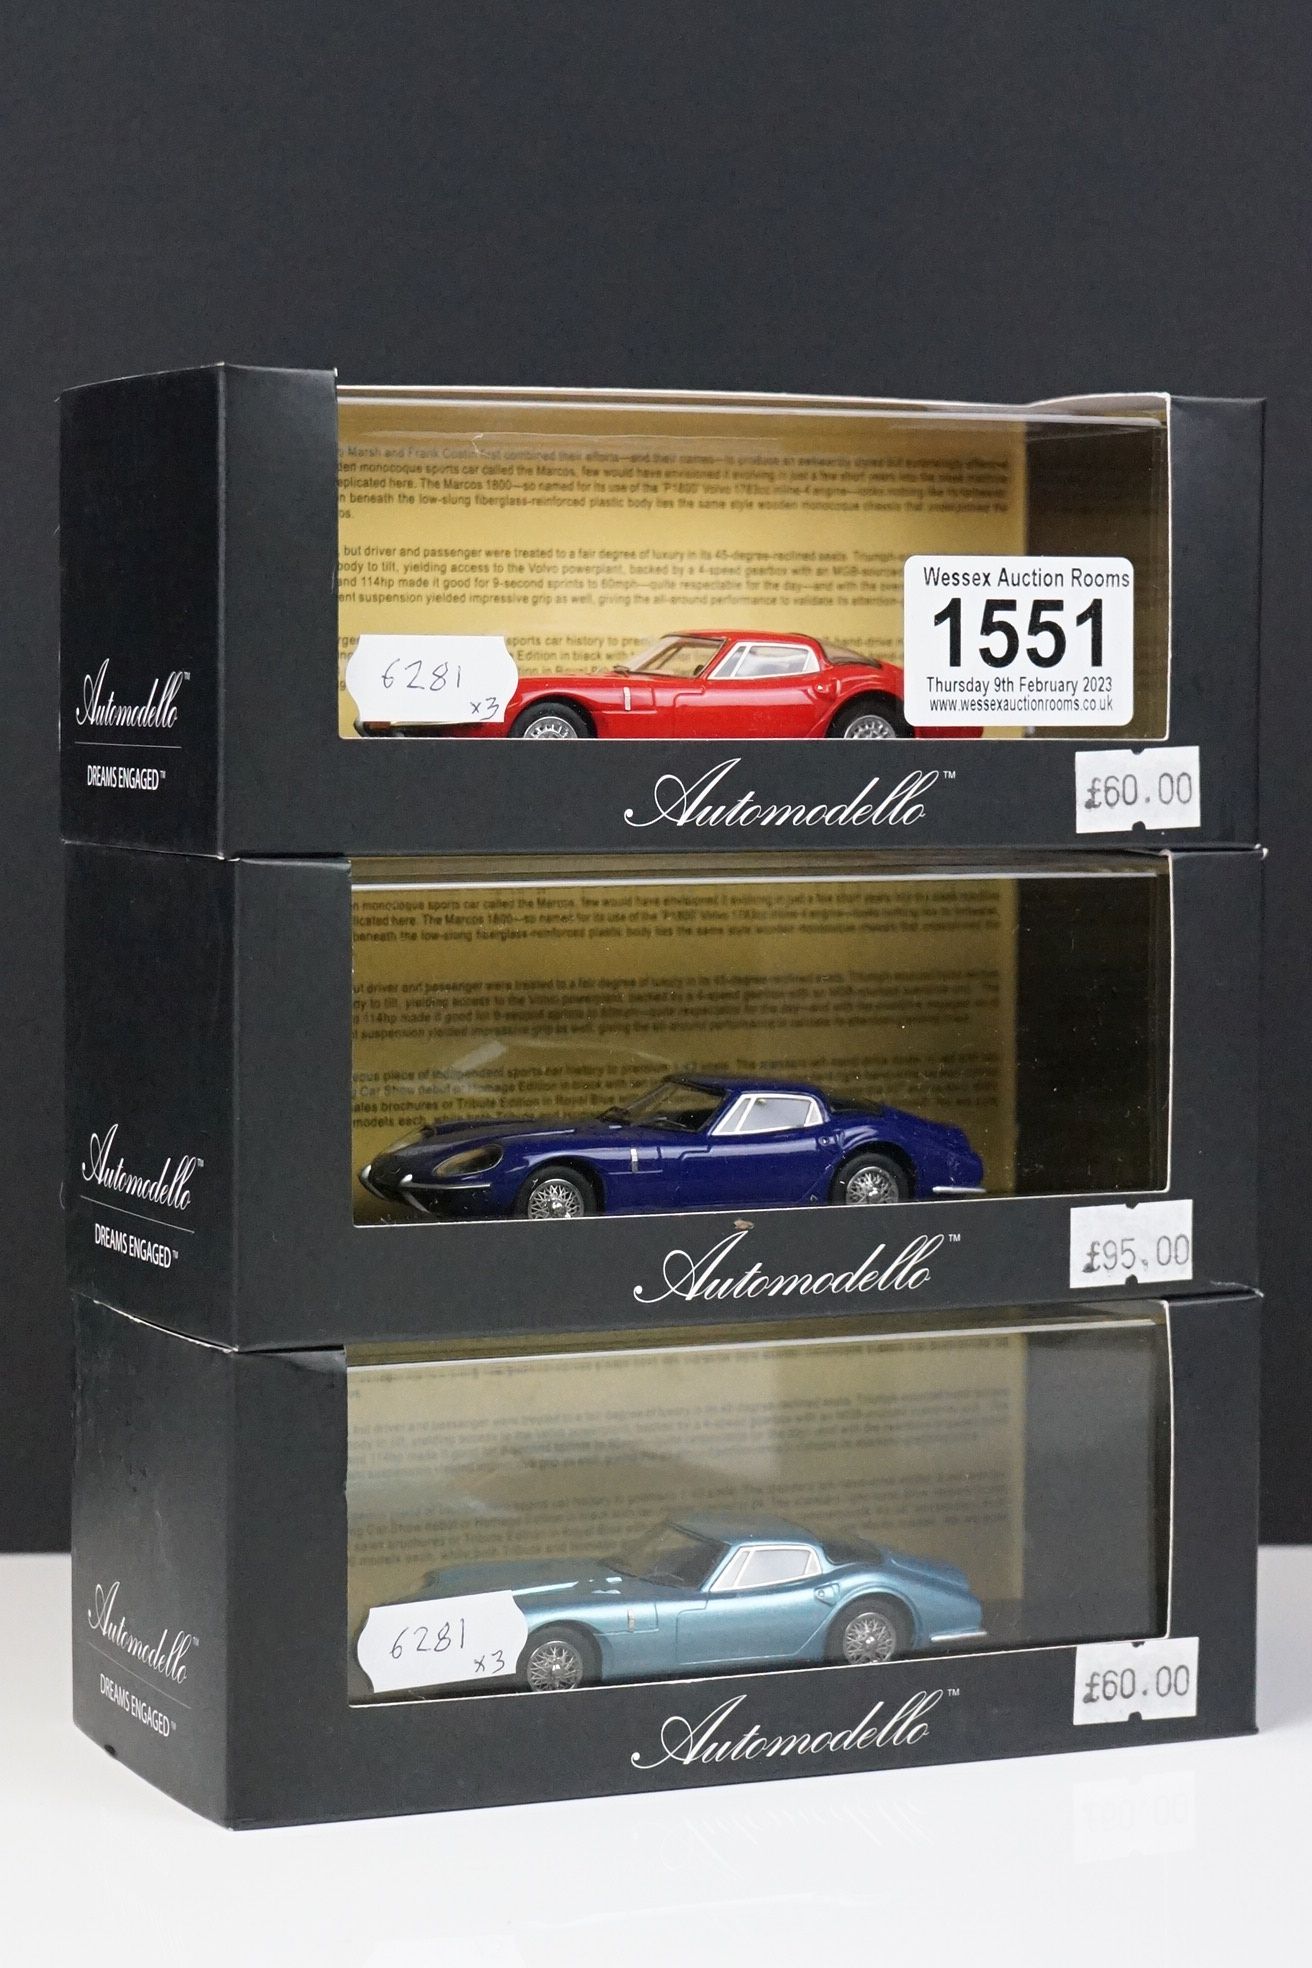 Three Boxed Automodello 1:43 1964 Marcos 1800 ltd edn models to include Tribute Edition Royal Blue